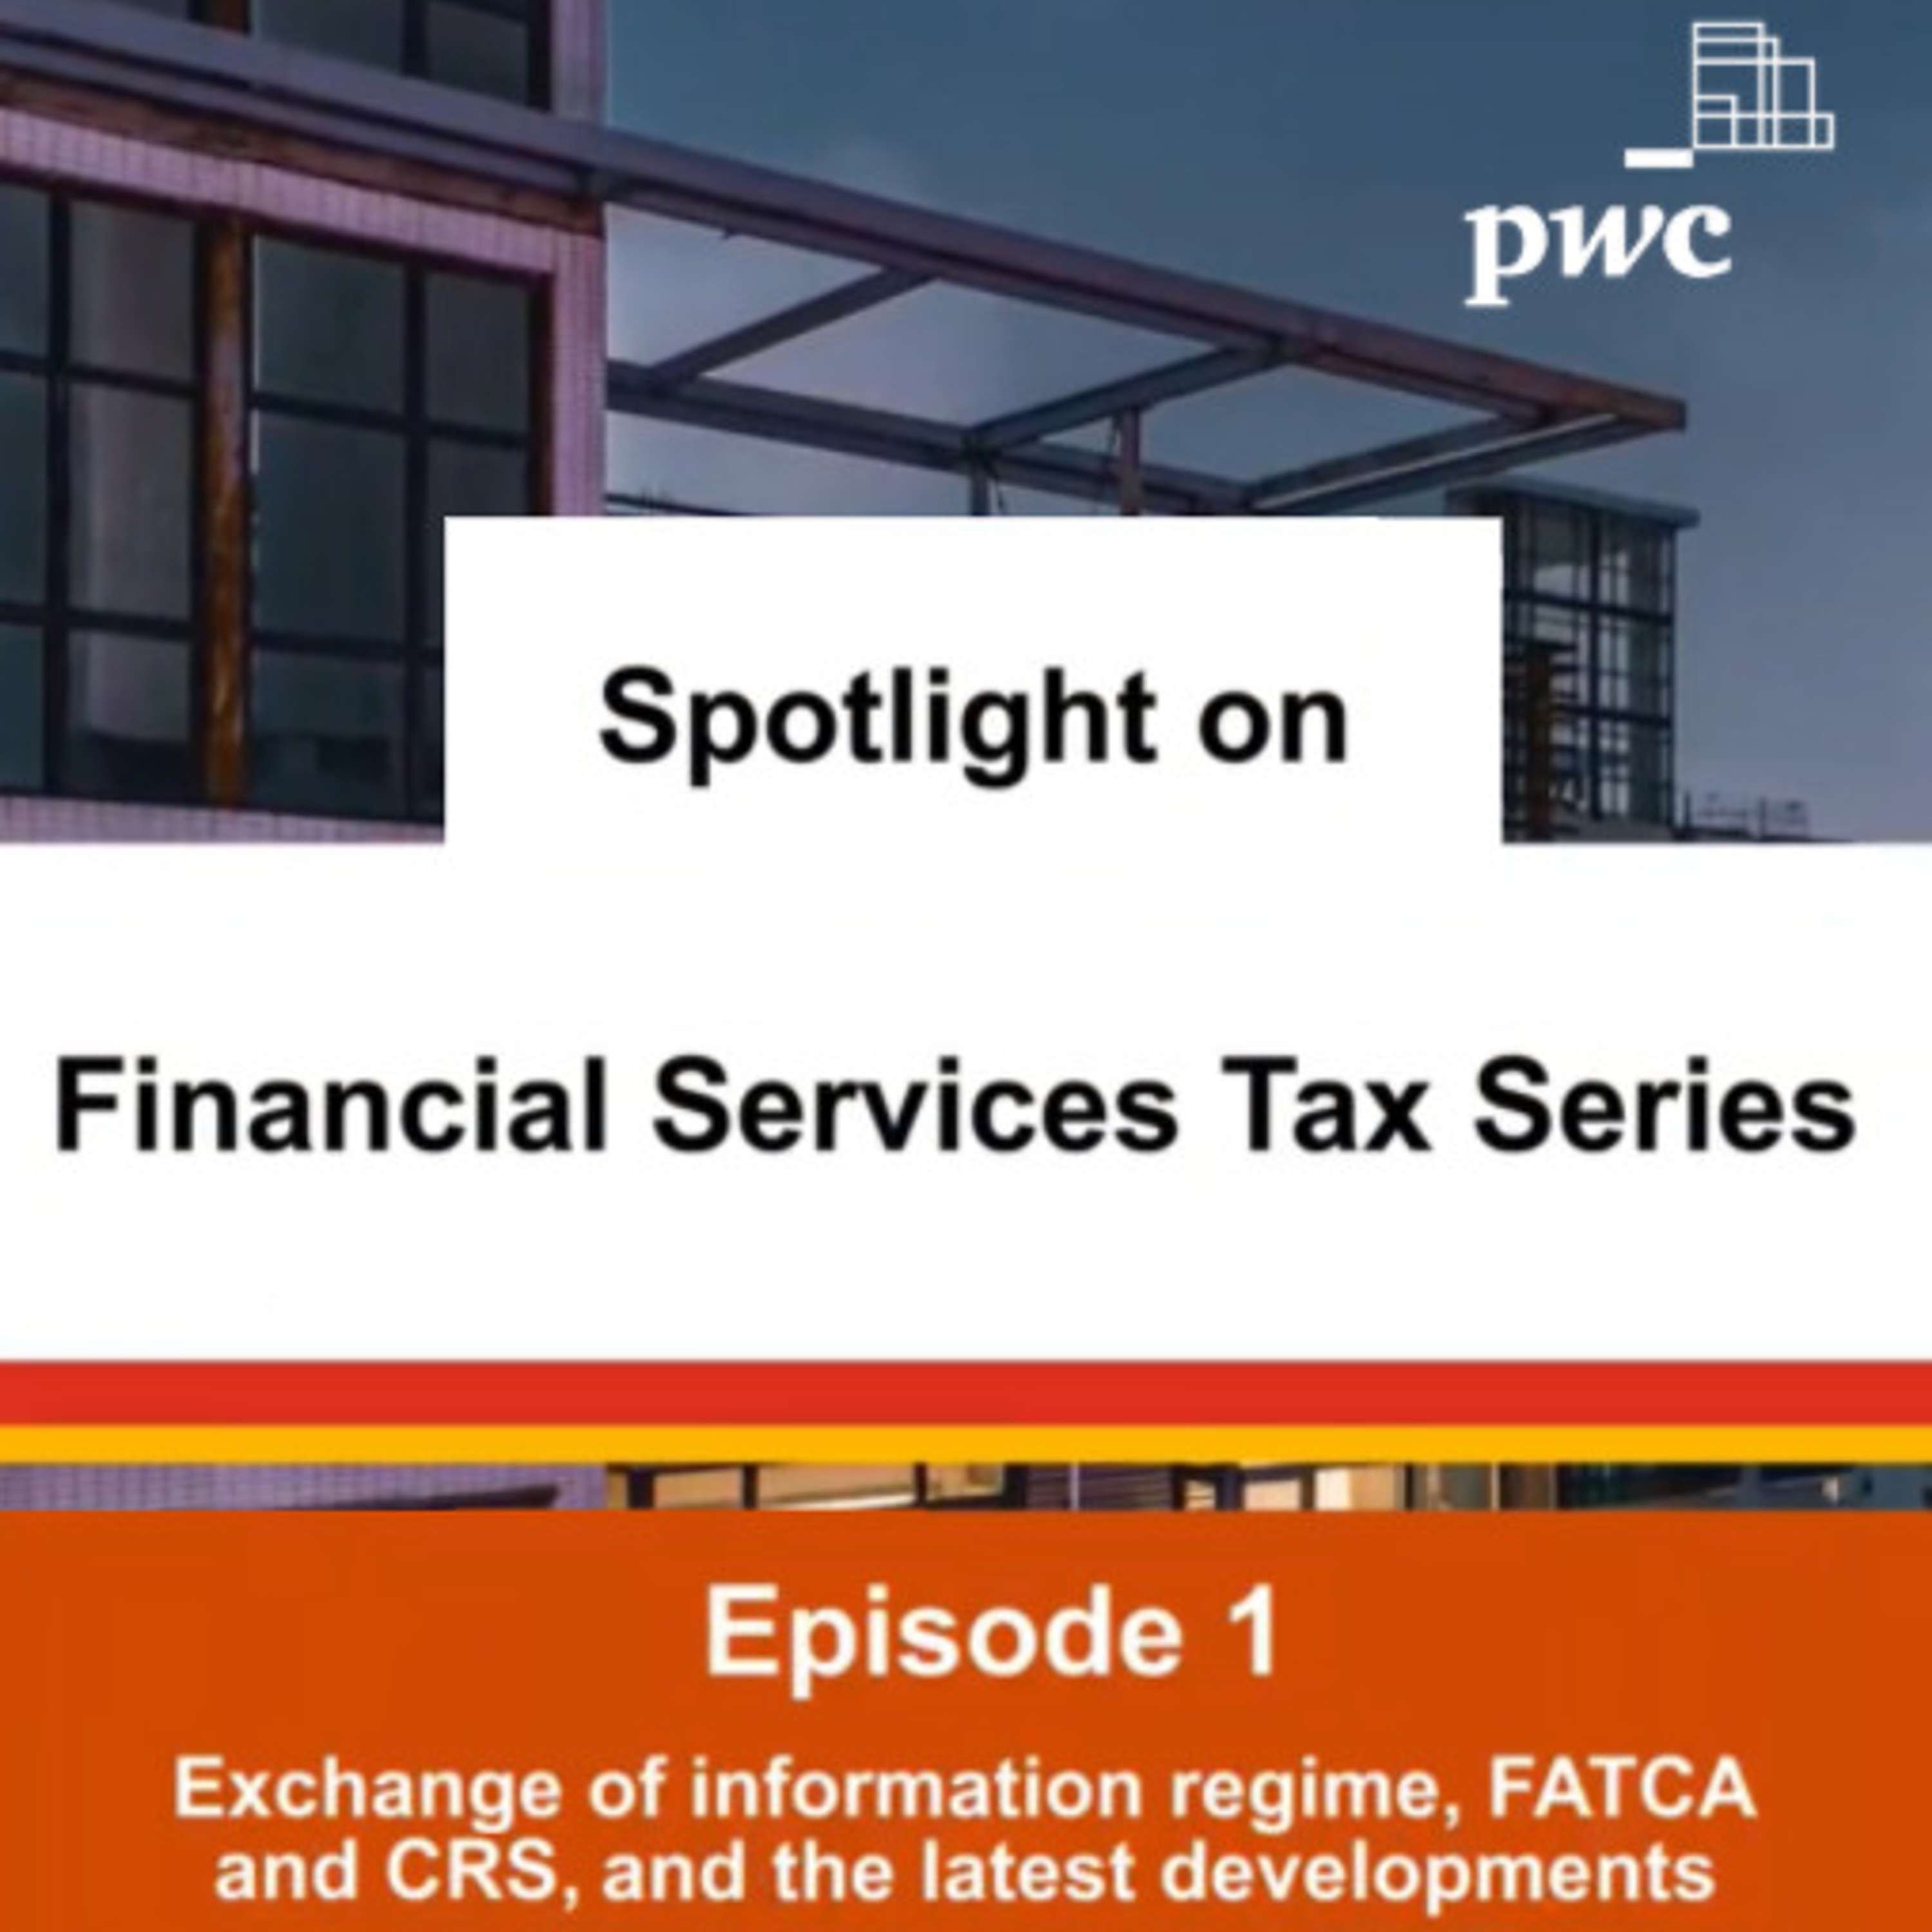 Series 1 - Episode 1: Exchange of information regime, FATCA and CRS, and the latest developments